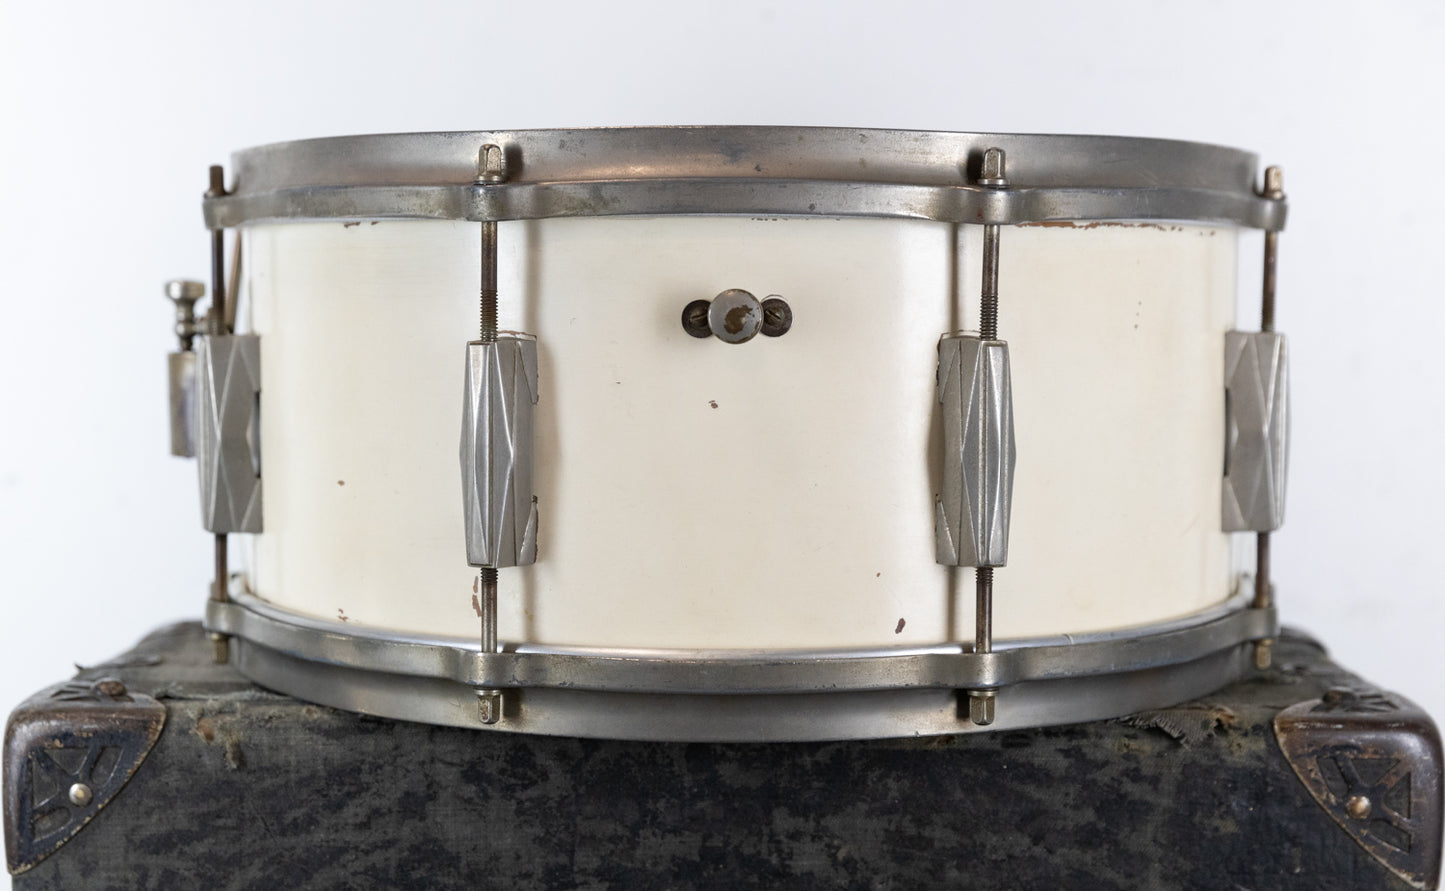 1948 Gretsch 6.5x14 Broadkaster "Duco-White" Snare Drum